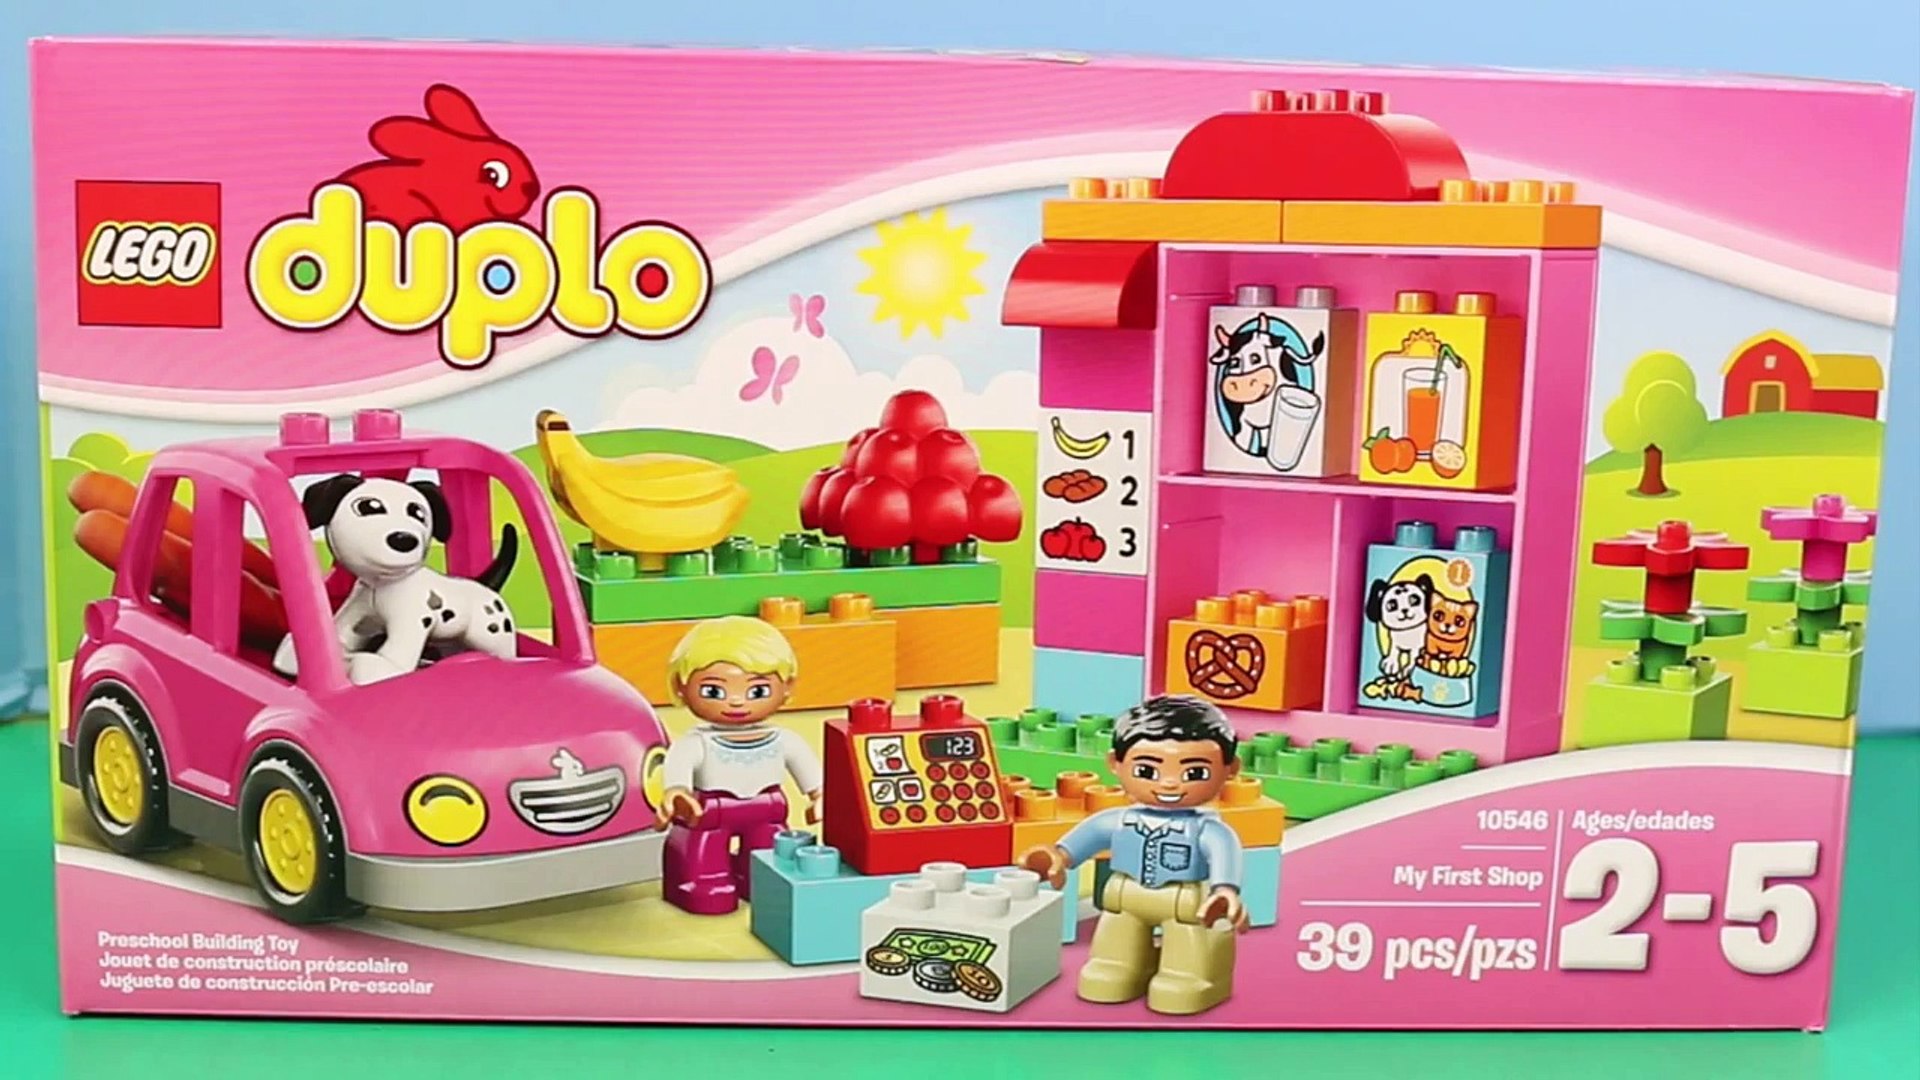 Duplo Lego My First Shop Reviewed by Mickey Mouse with Lego Food and a Duplo  Lego Car - Dailymotion Video